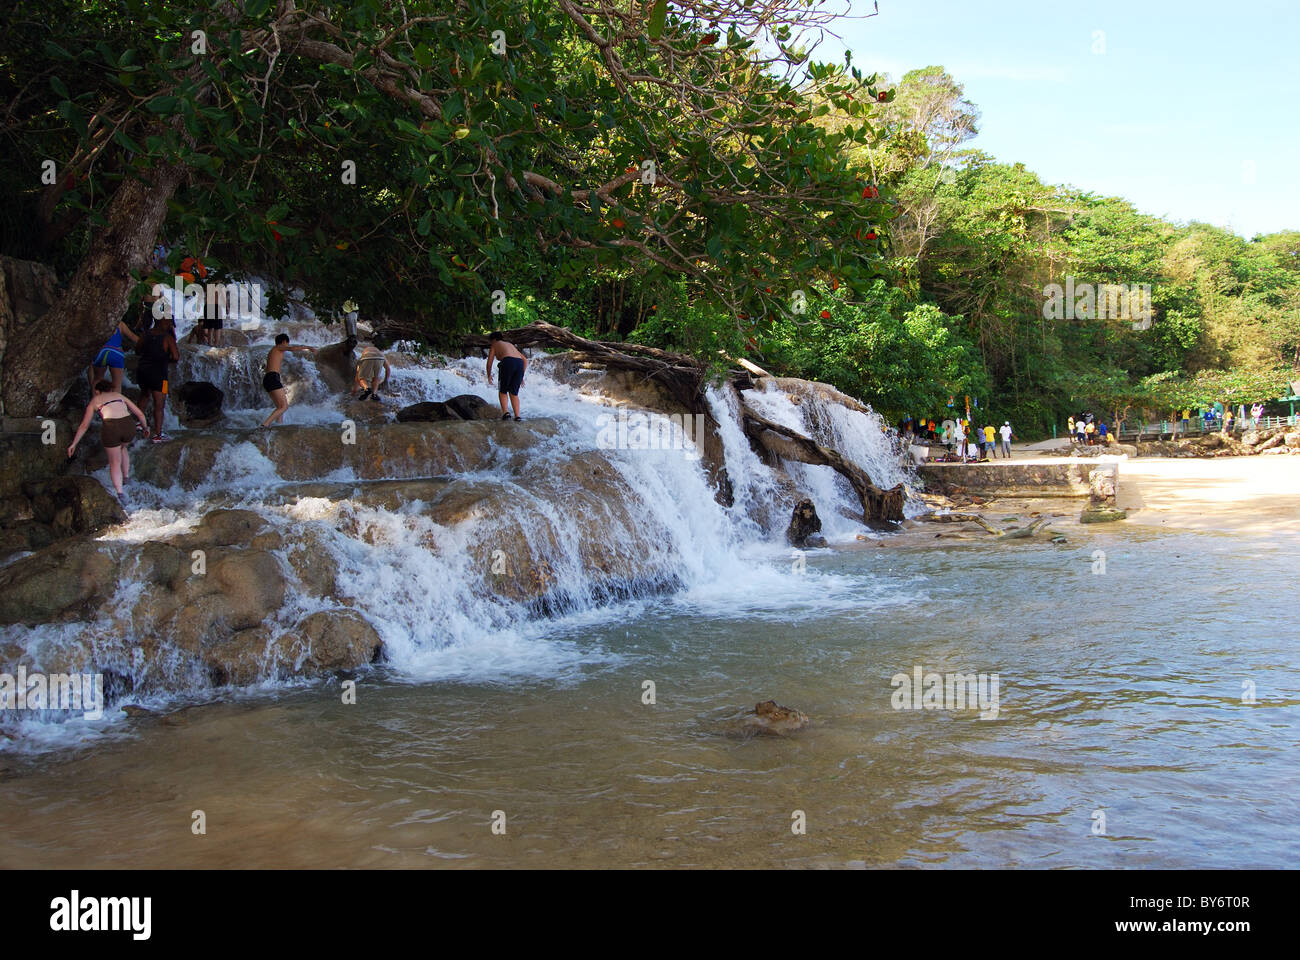 People standing in Dunns River Falls, Ocho Rios, Middlesex County, Jamaica, Caribbean. Stock Photo